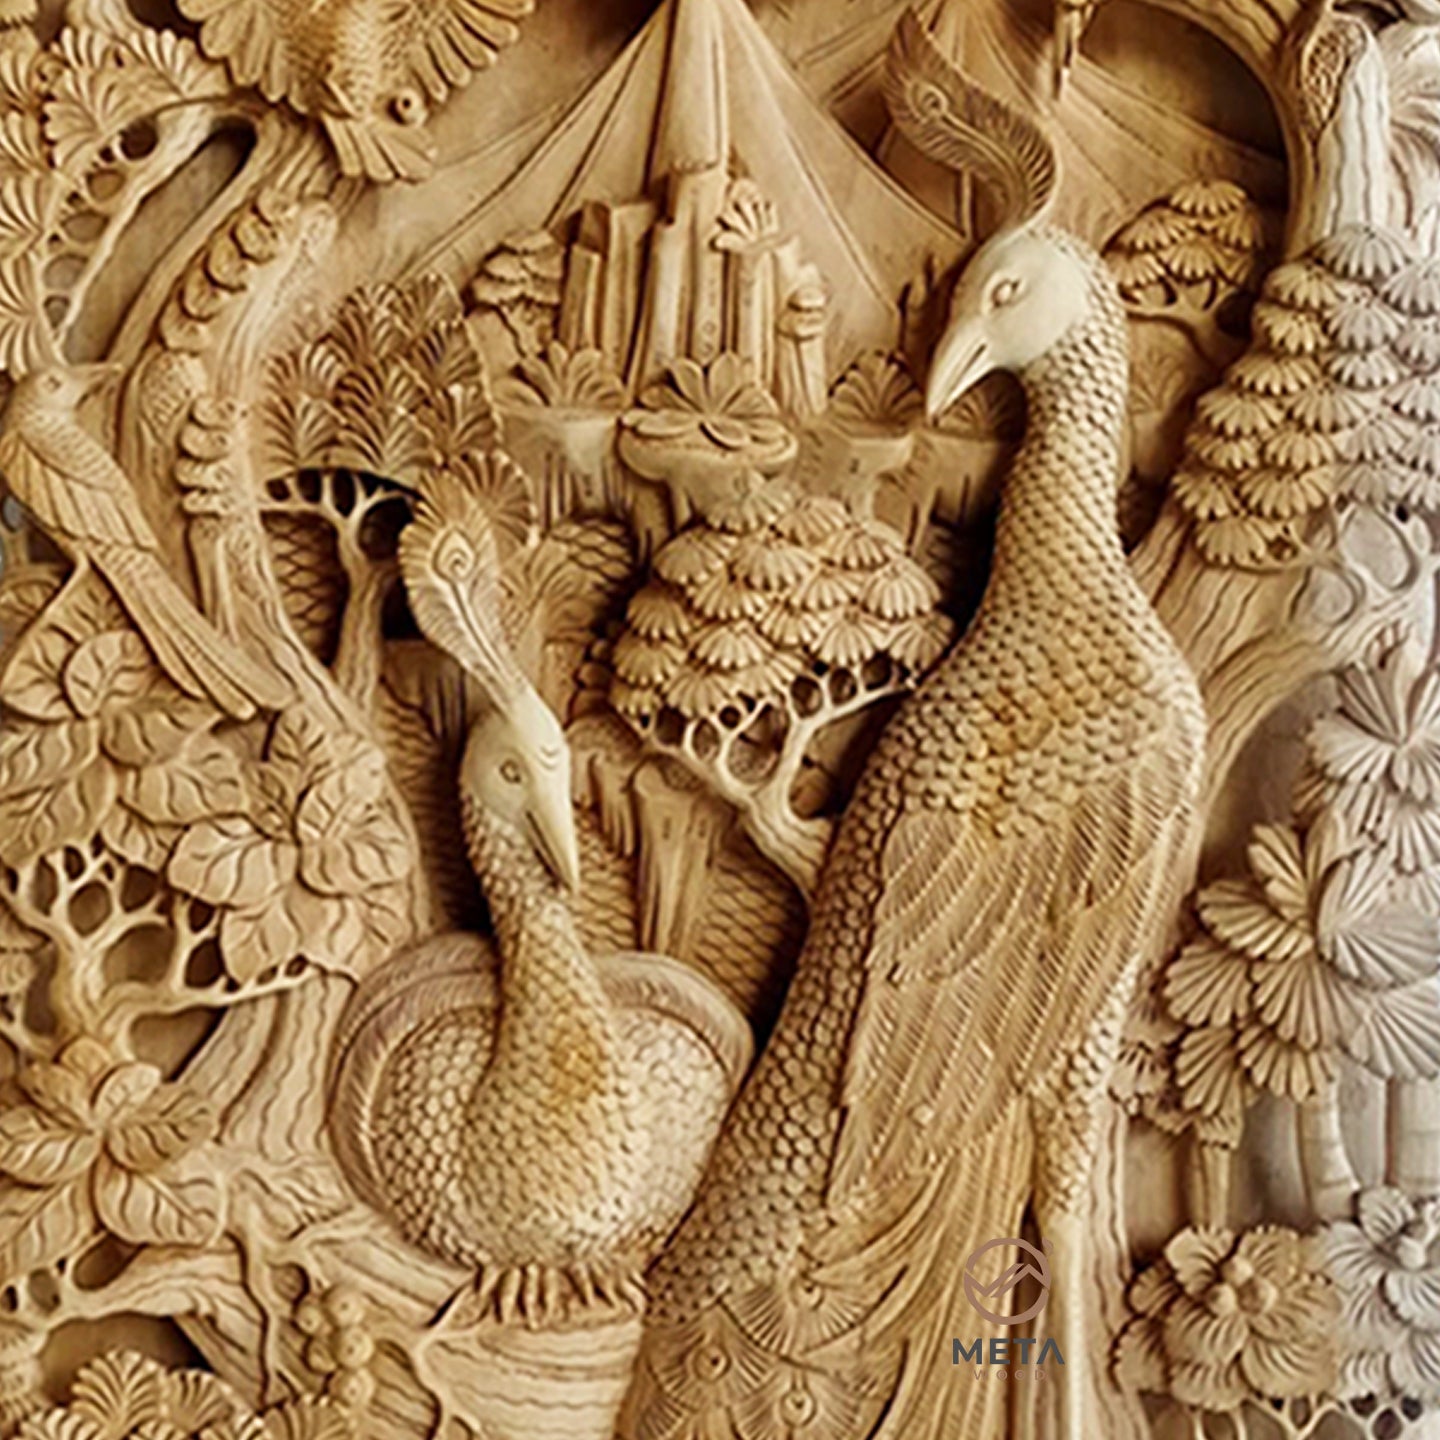 This wooden relief carving showing the activity of a pair of peacocks is truly one of a kind piece of artwork. If you crave a piece of unique, alluring, and beautiful art, this piece is for you. This piece is incredibly ornate and will look equally as lovely mounted on a wall or placed on a bookshelf.